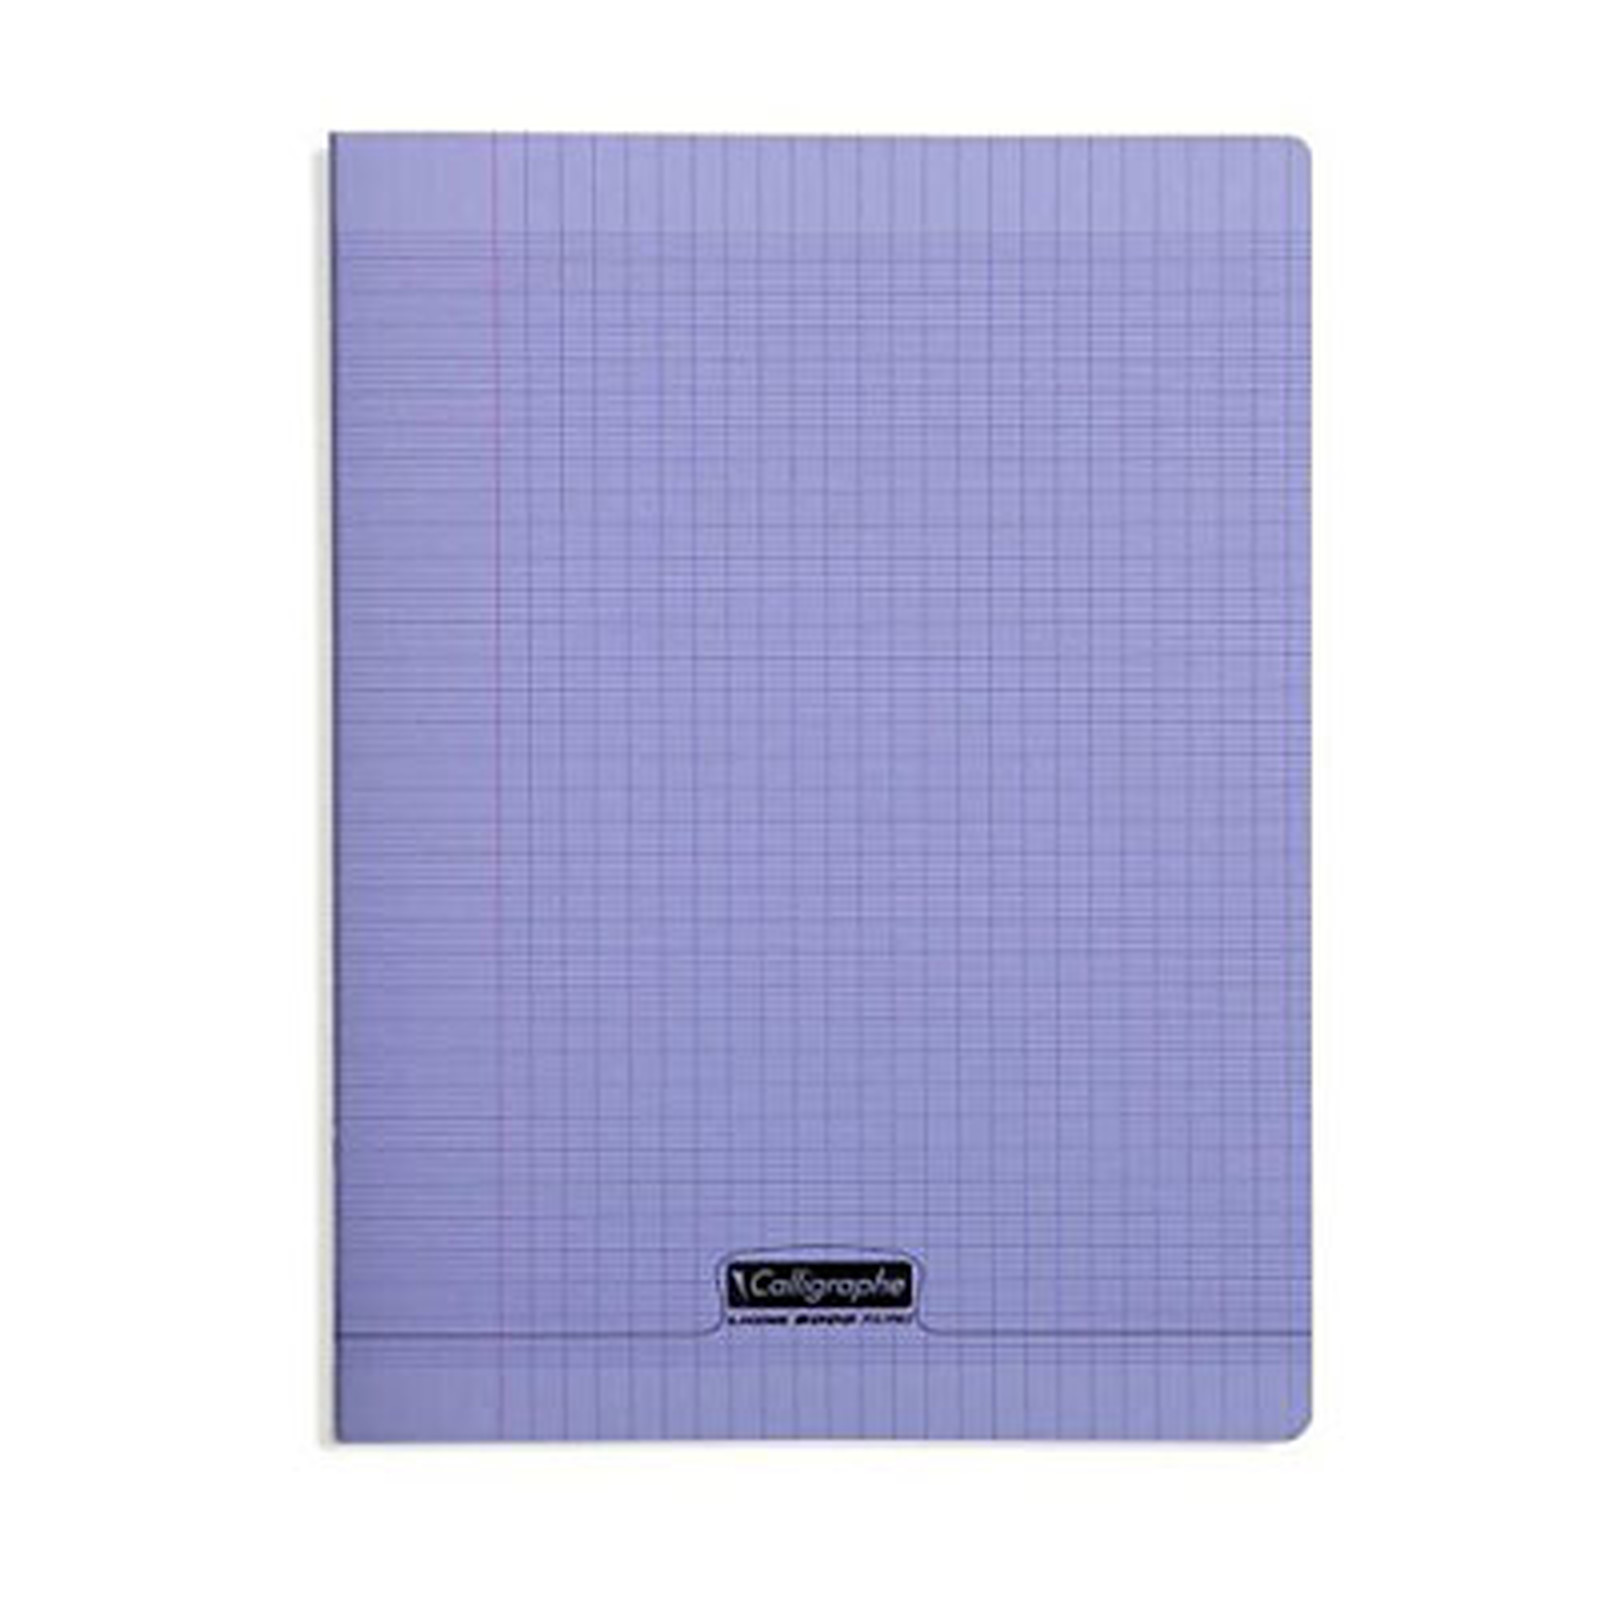 Calligraphe 8000 Polypro Cahier 96 pages 24 x 32 cm seyes grands carreaux Violet - Cahier Calligraphe